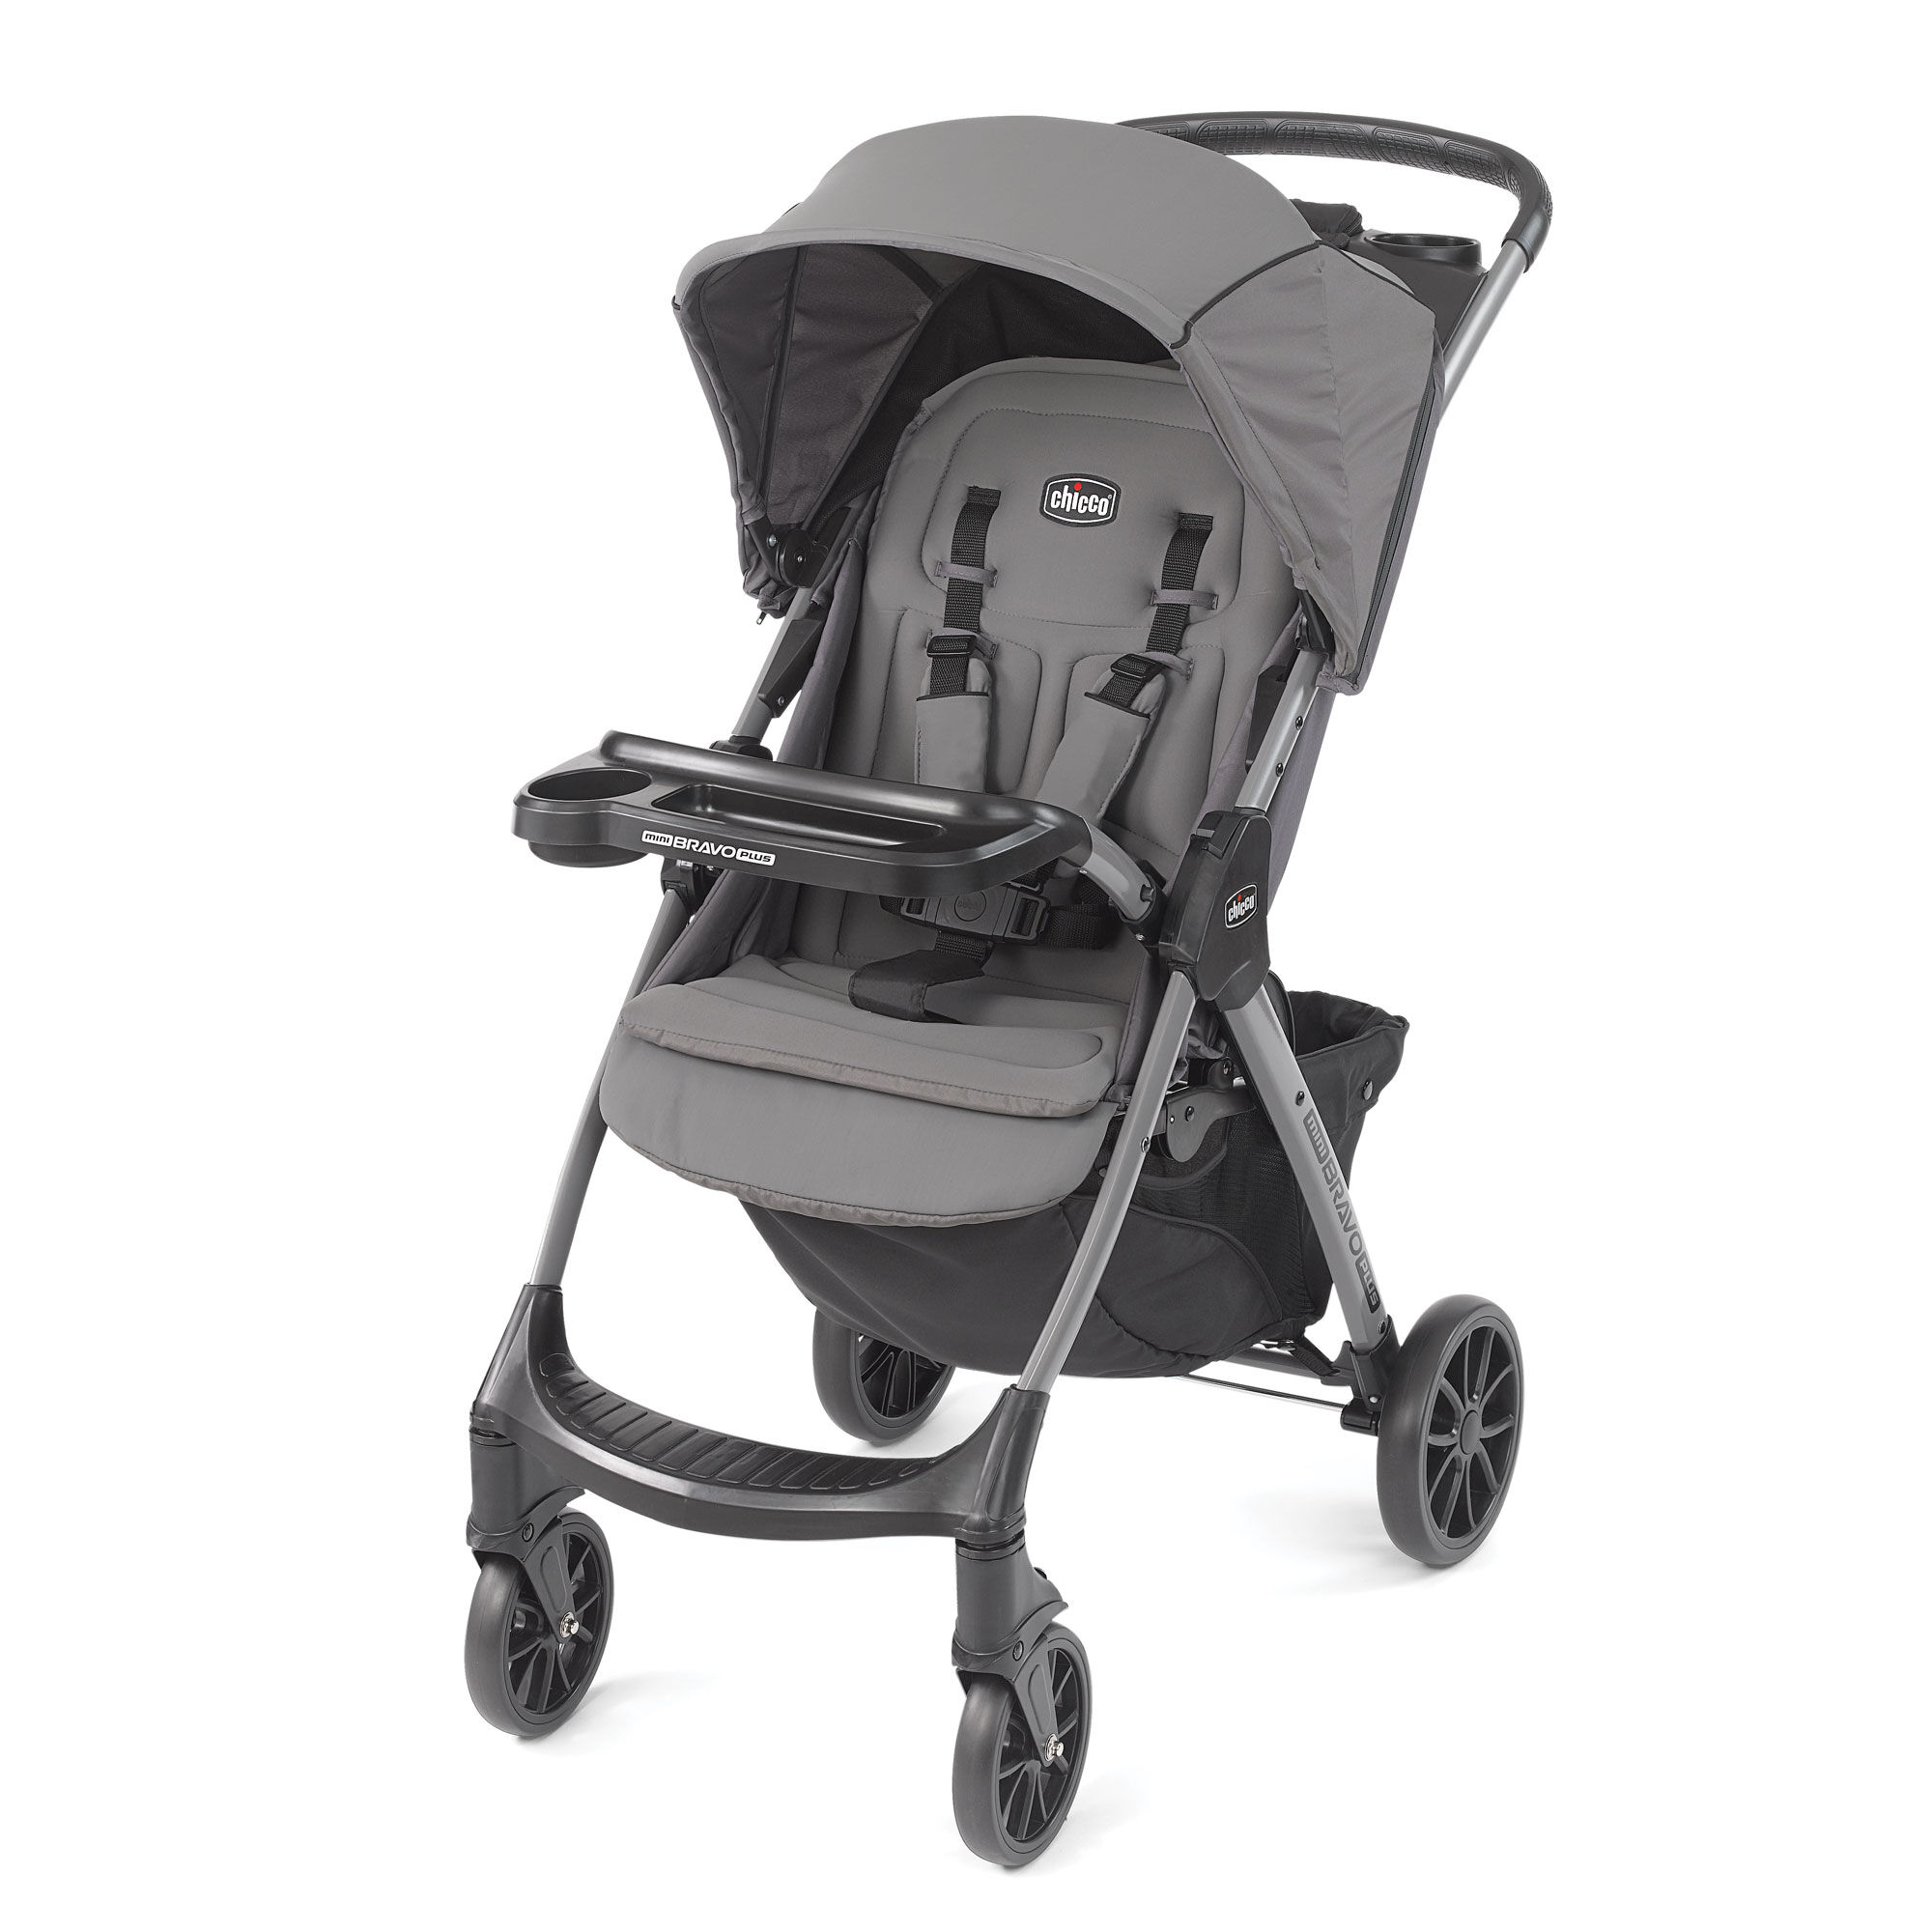 https://www.chiccousa.com/dw/image/v2/AAMT_PRD/on/demandware.static/-/Sites-chicco_catalog/default/dw23b82f9f/images/products/Gear/minibravo/chicco-mini-bravo-plus-stroller-graphite.jpg?sw=2000&sh=2000&sm=fit